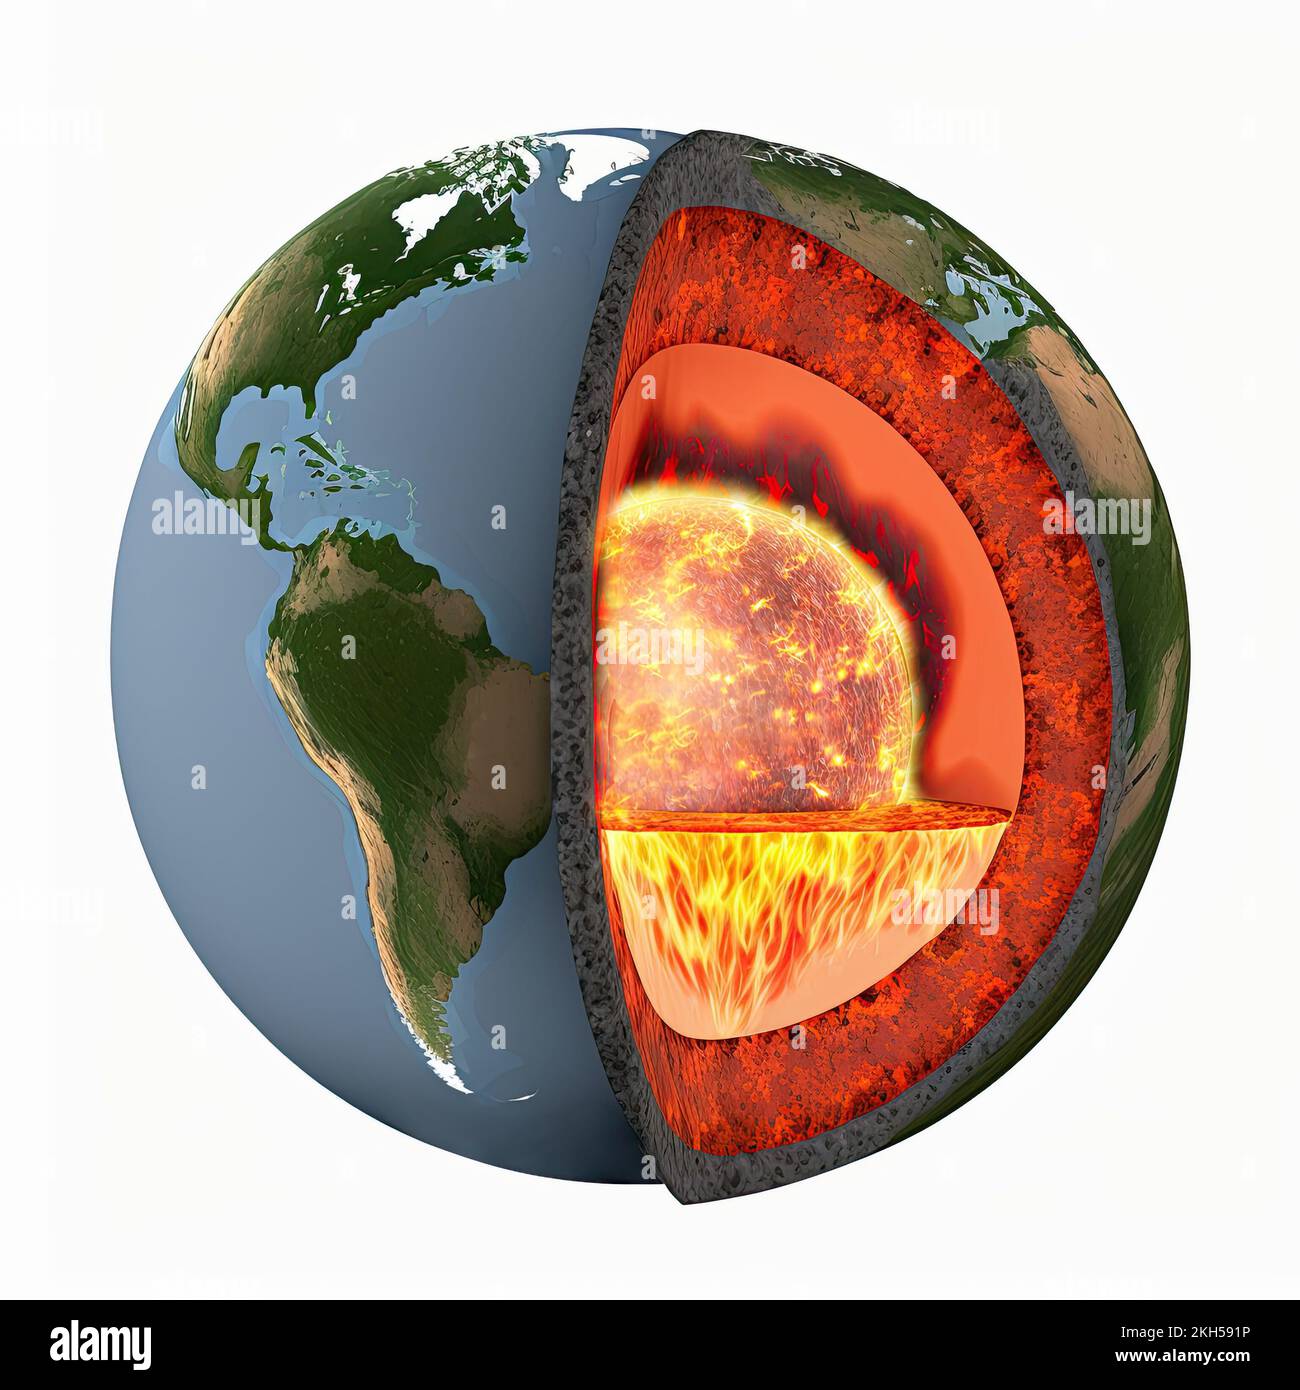 A cross-section cutaway view of the world, showing the crust, mantle, and inner core. 3D illustration with copy space. Stock Photo